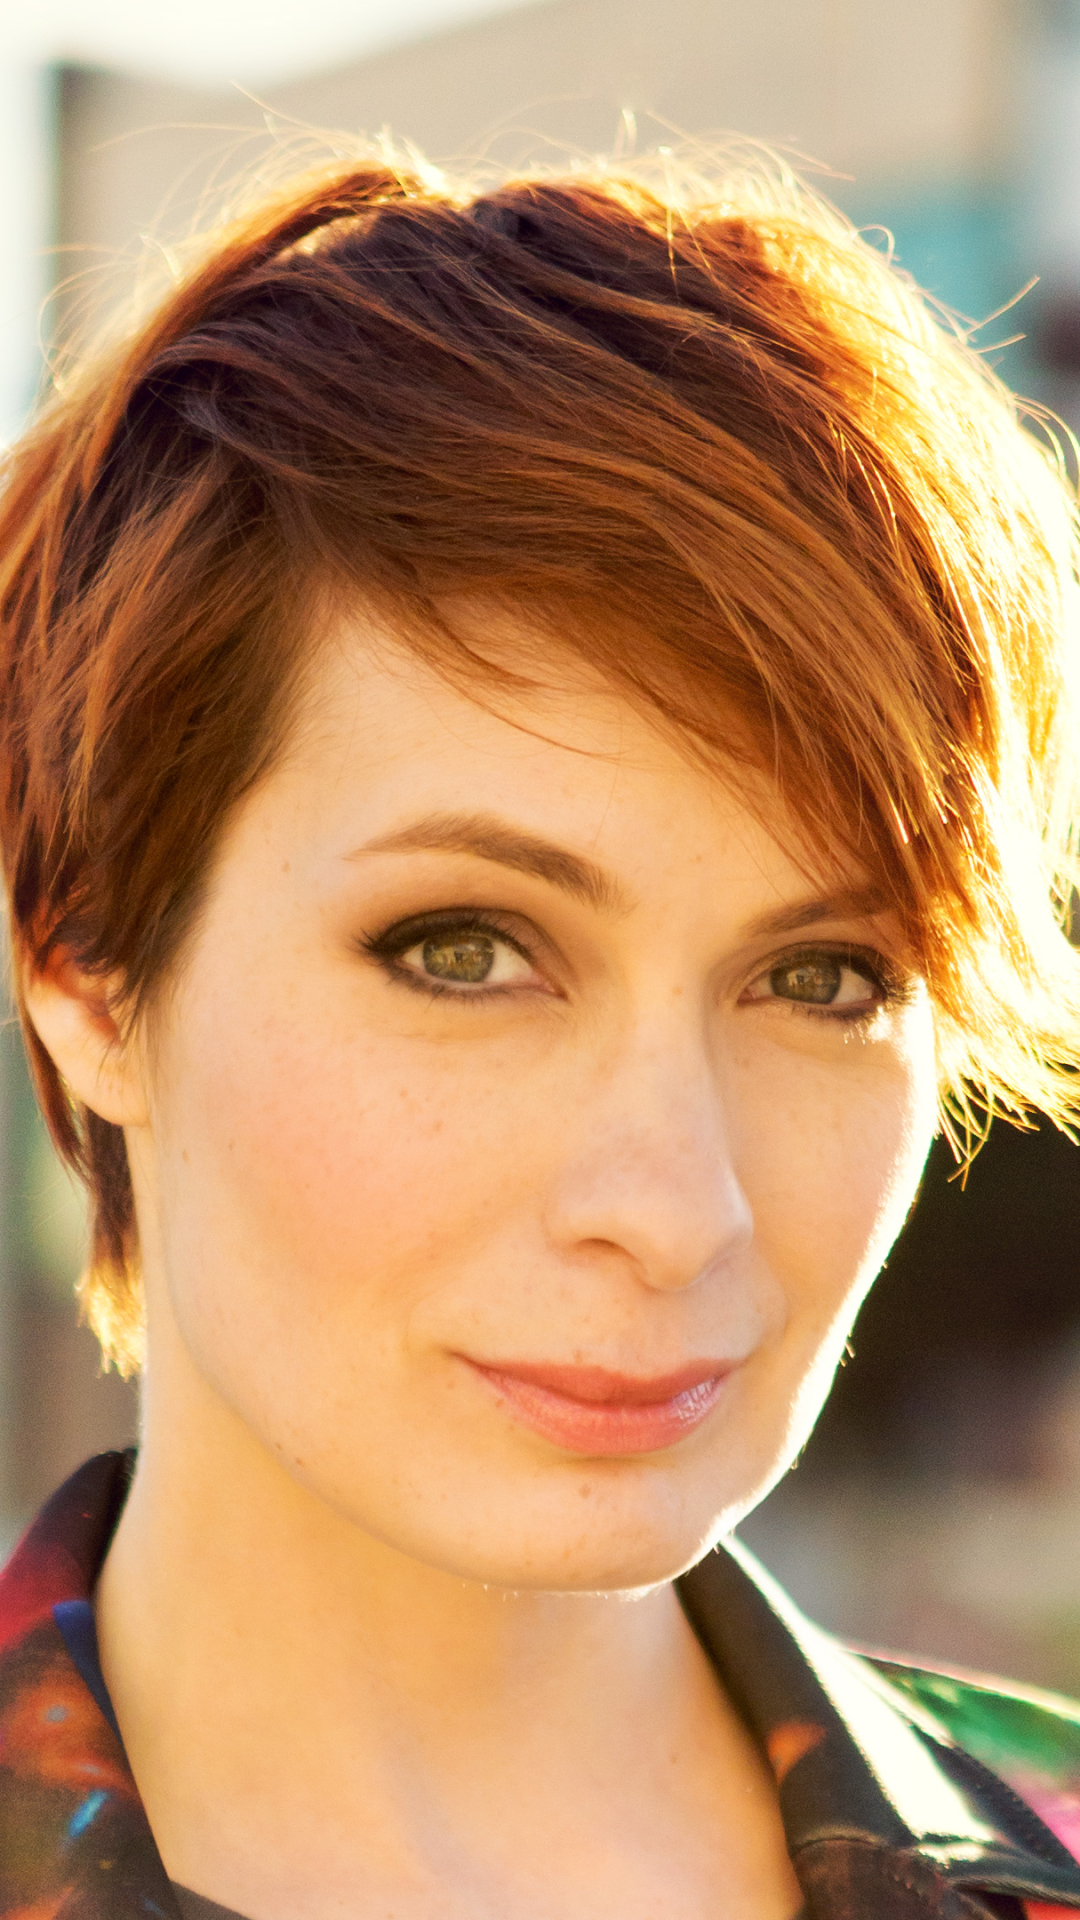 celebrity, felicia day, american, actress phone background